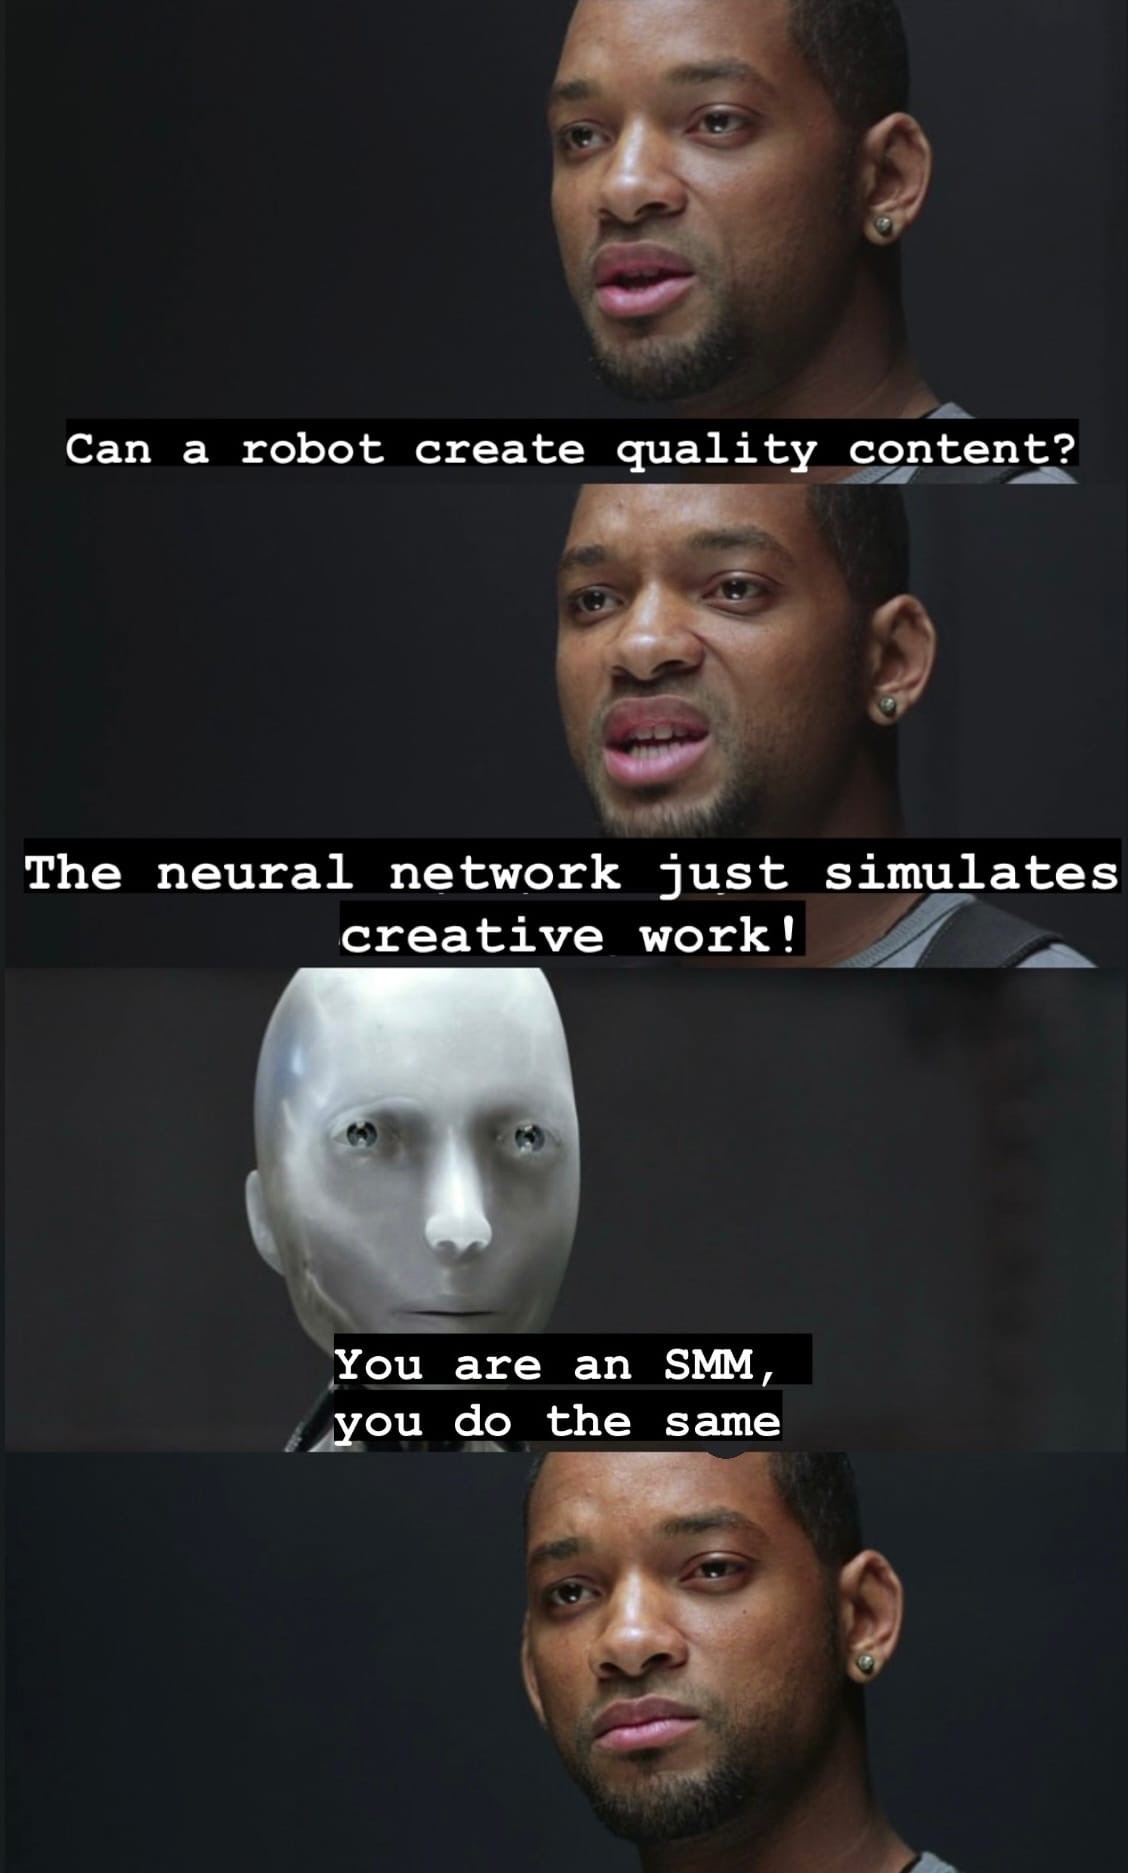 Without a doubt, AI can write a script for a video